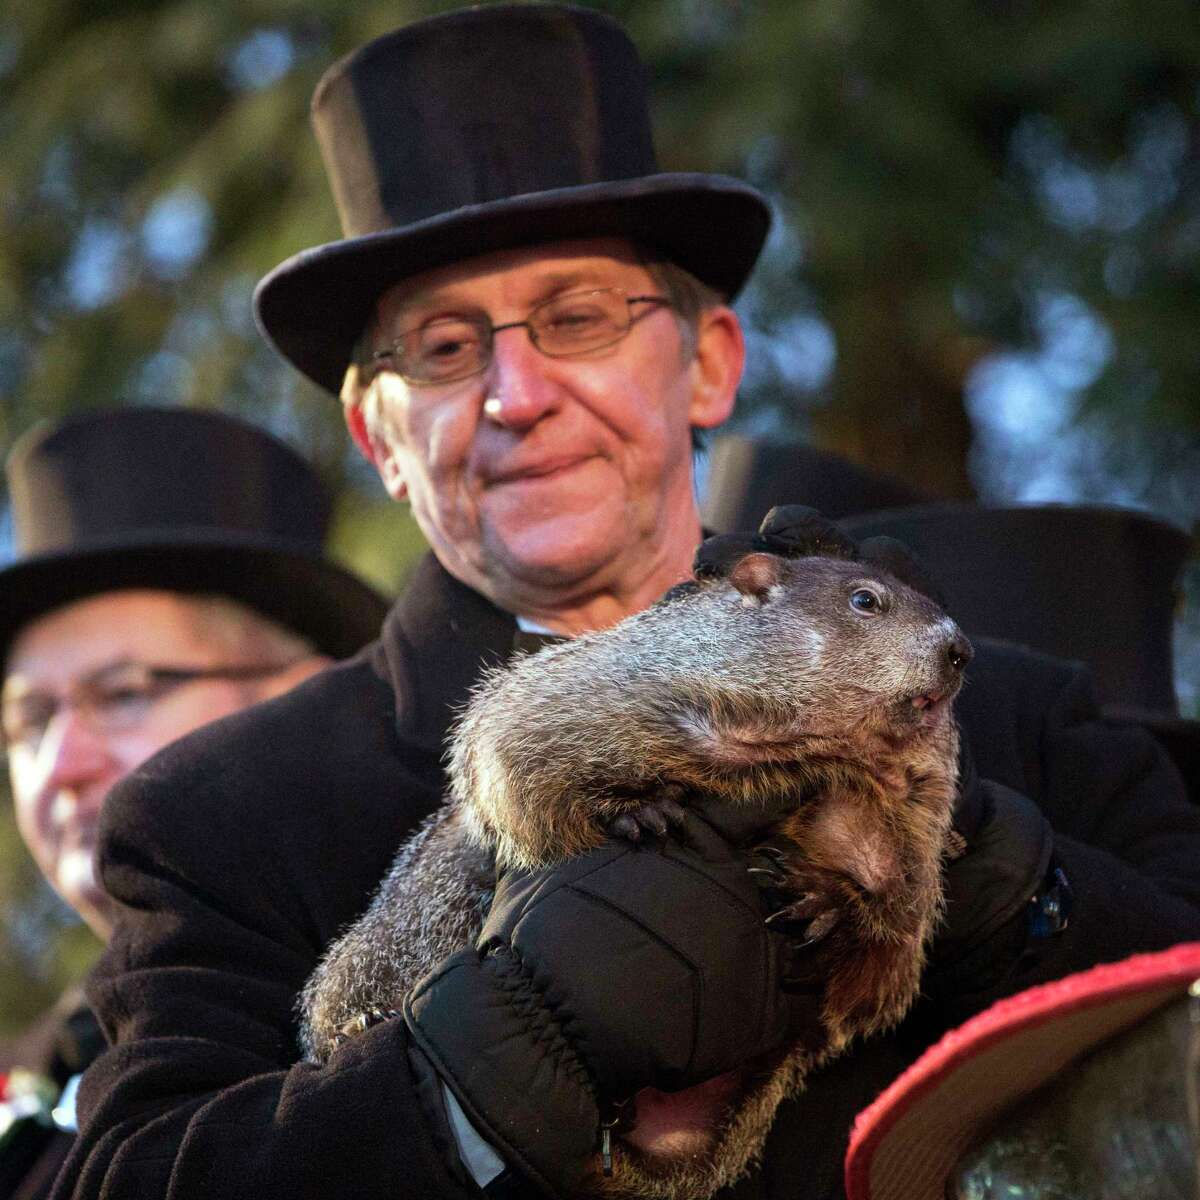 Handler Ron Ploucha holds up Punxsutawney Phil during the annual celebration of Groundhog Day on Gobbler’s Knob in Punxsutawney, Pa., Tuesday, Feb. 2, 2016. The handlers say the furry rodent failed to see his shadow at dawn Tuesday, meaning he “predicted” an early spring.